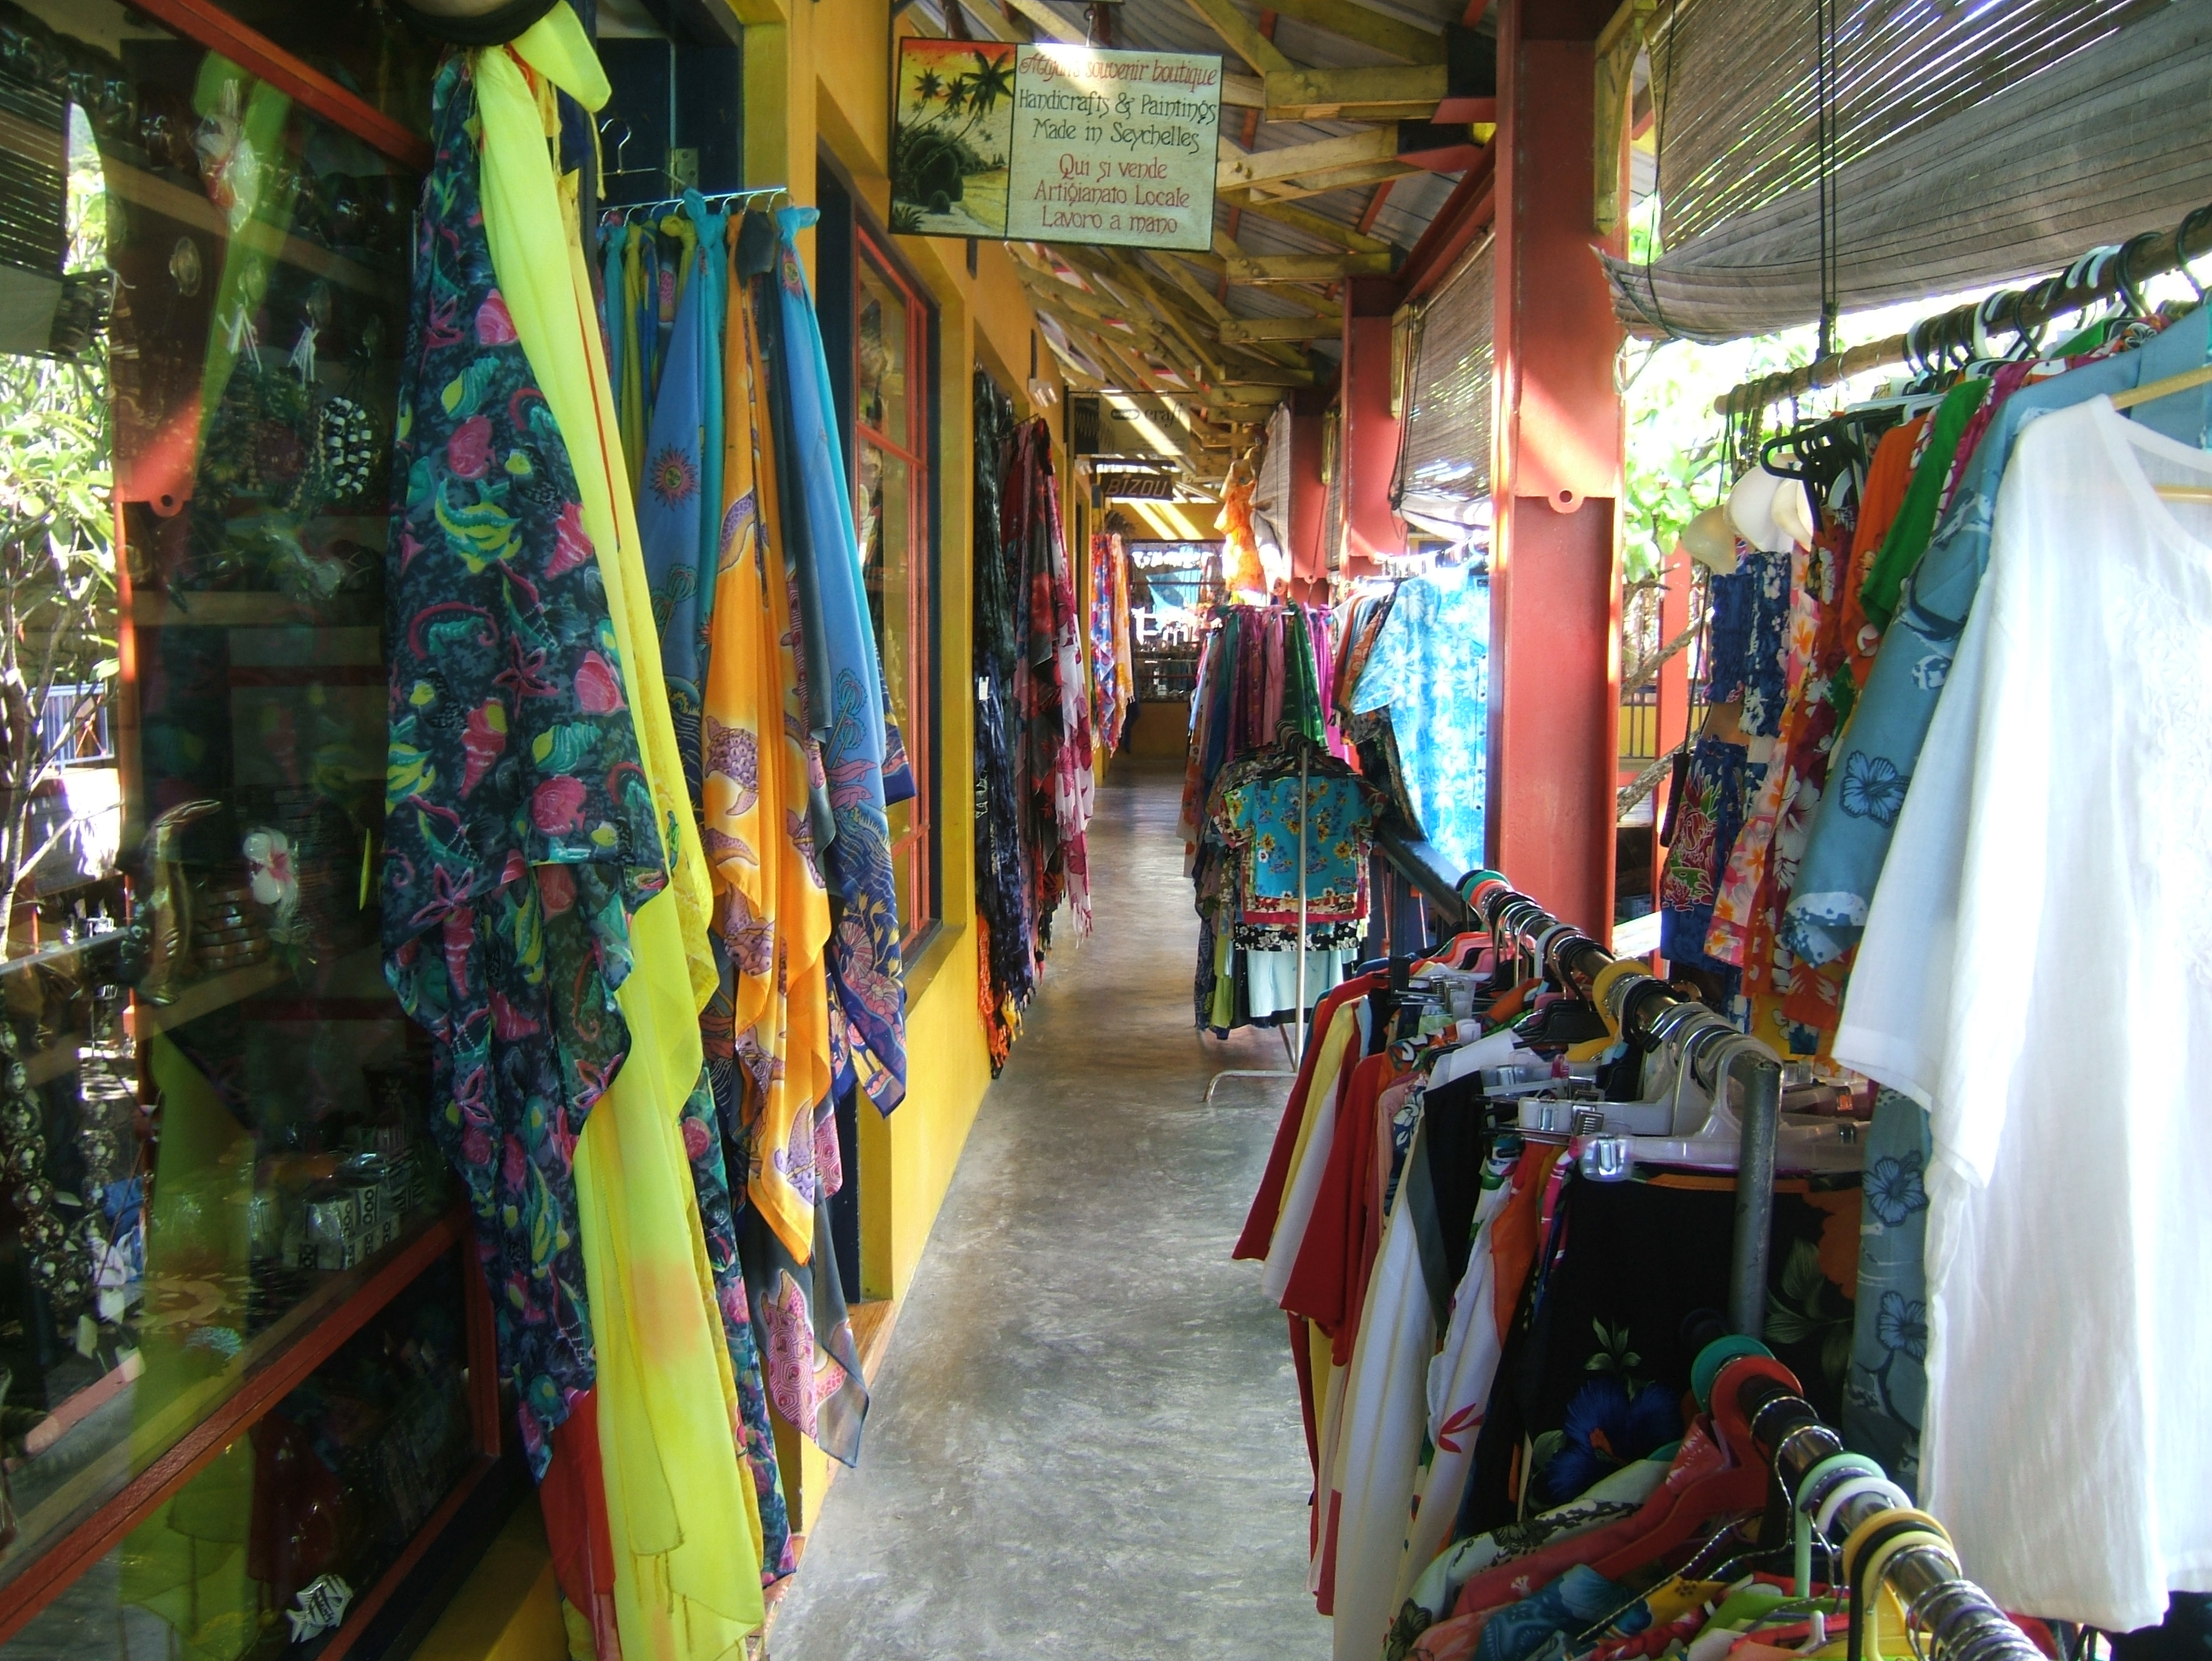 craft-shops-provide-a-colourful-attraction-for-visitors.jpg